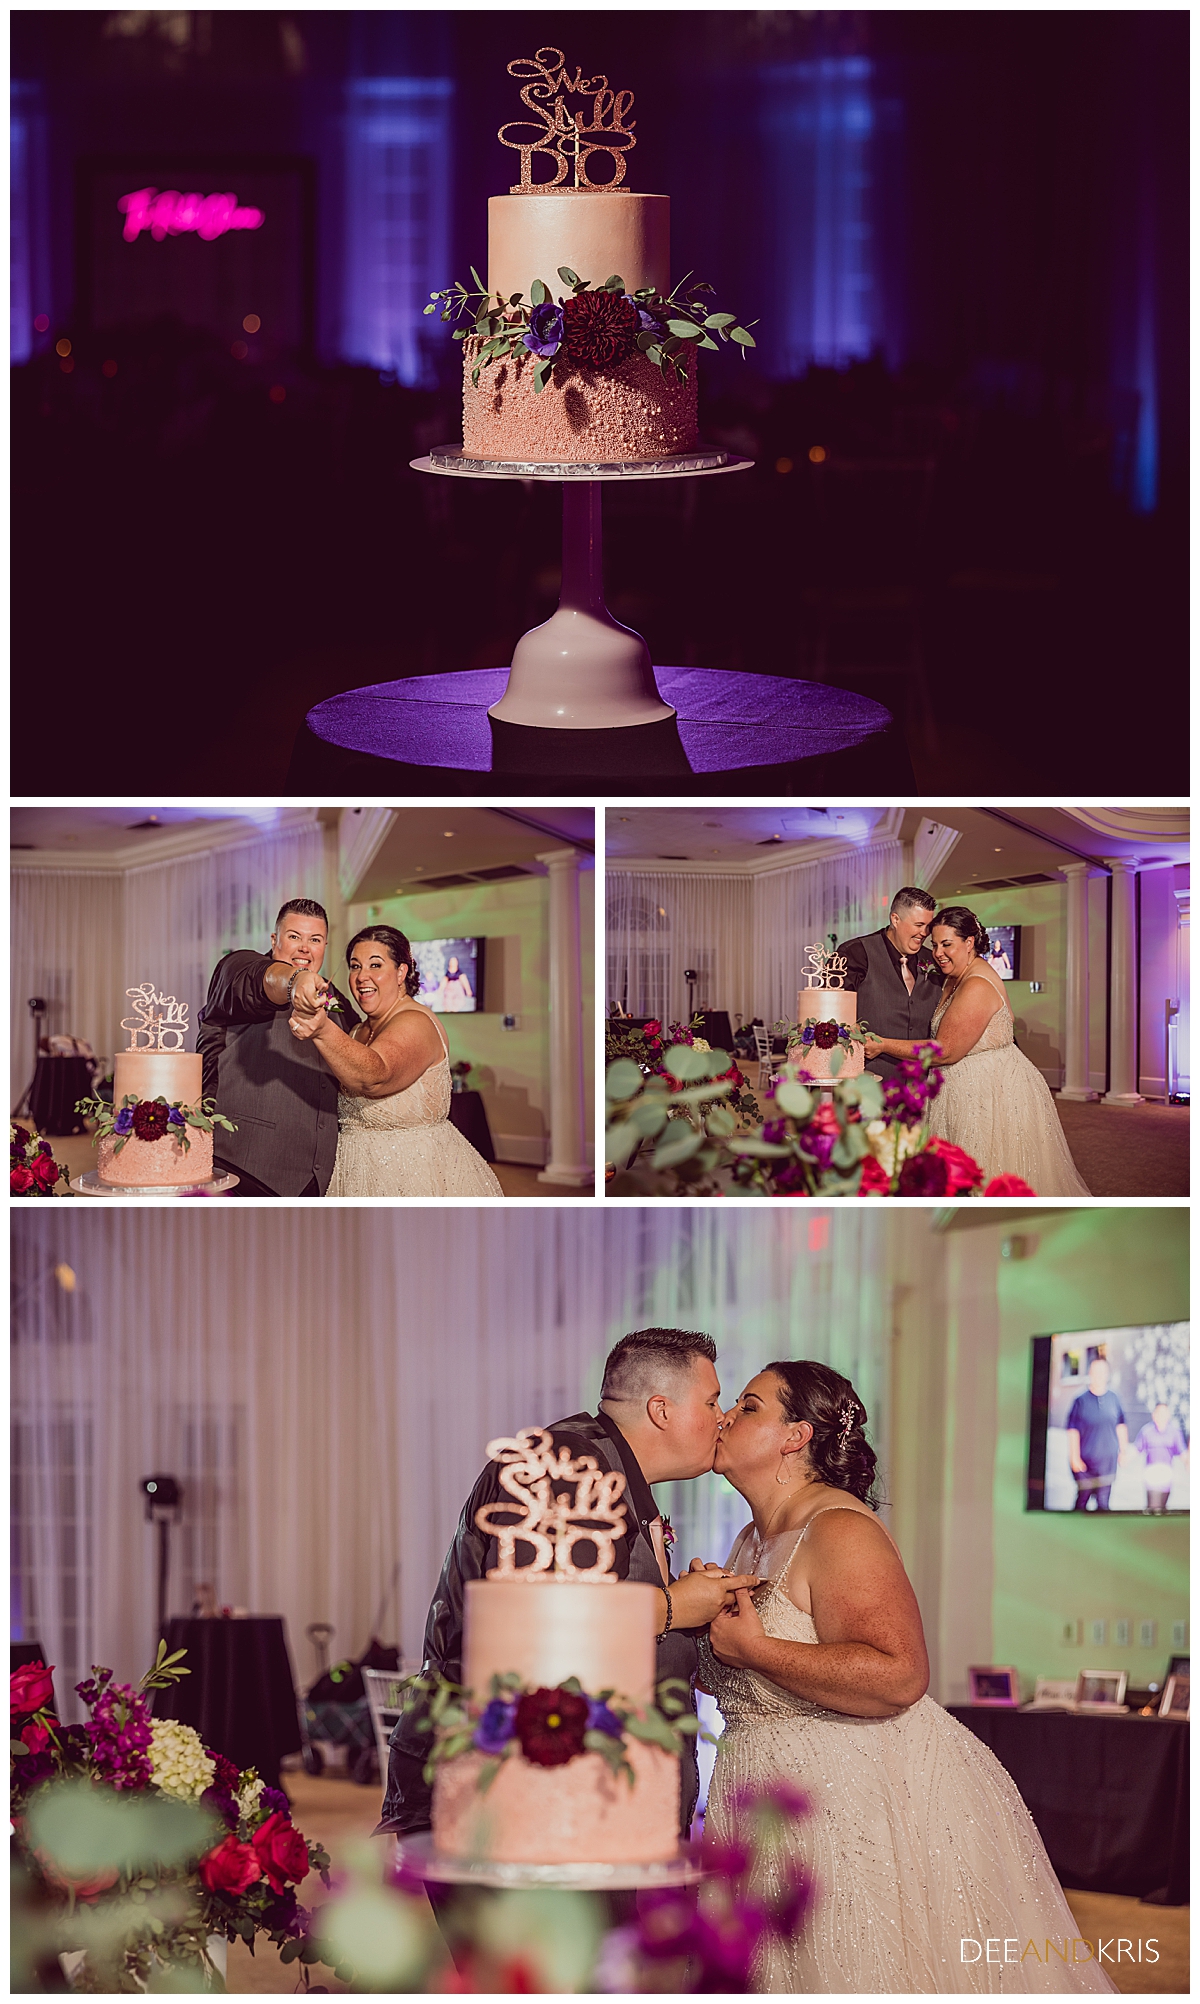 Four images of cake and cake cutting